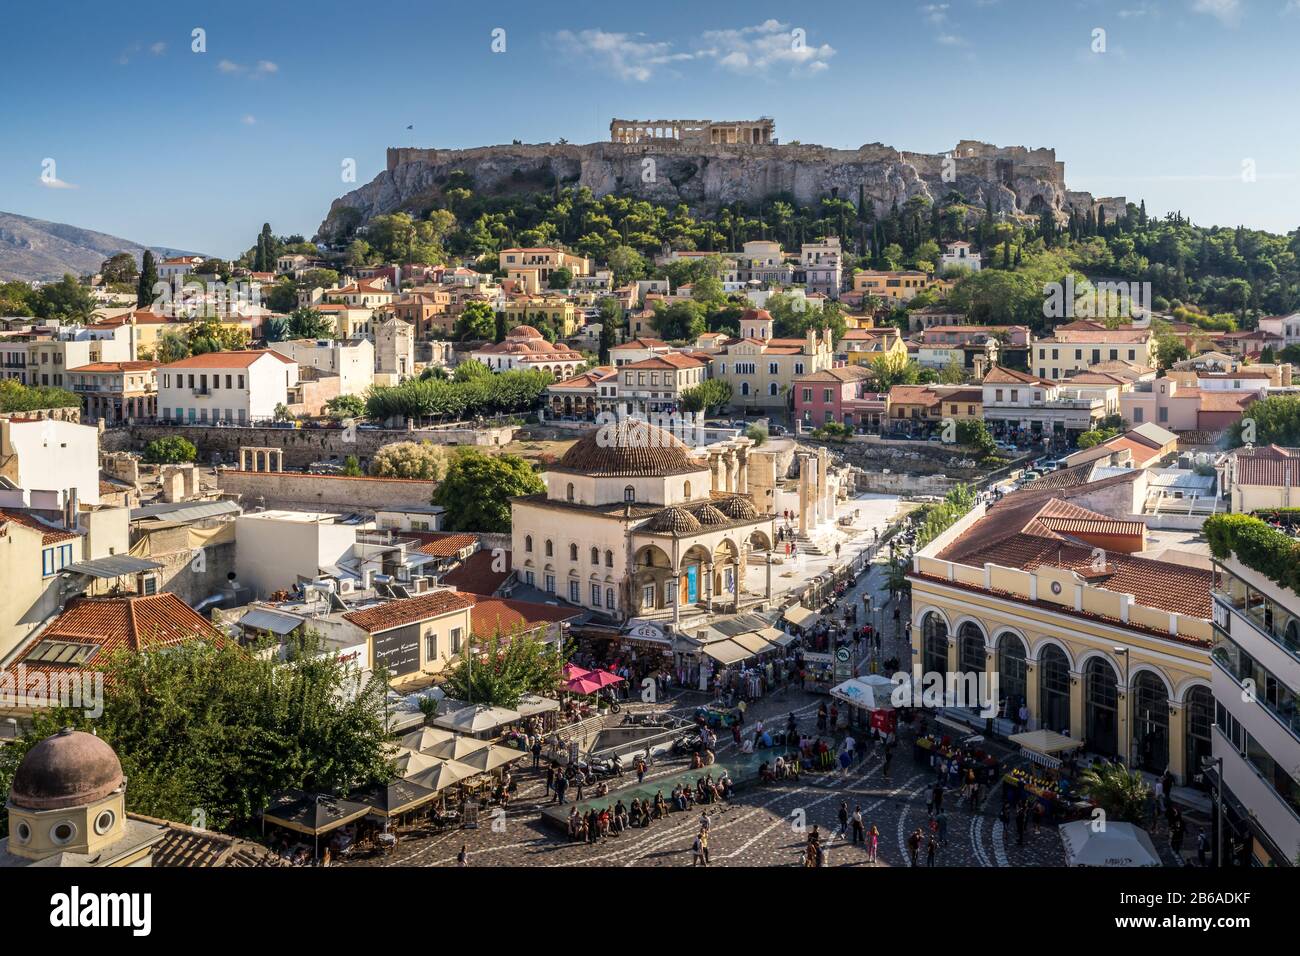 Athens, Greece - Oct 9, 2019 - The popular Monastiraki Square and ancient Acropolis are the must go places for tourists in Athens Stock Photo